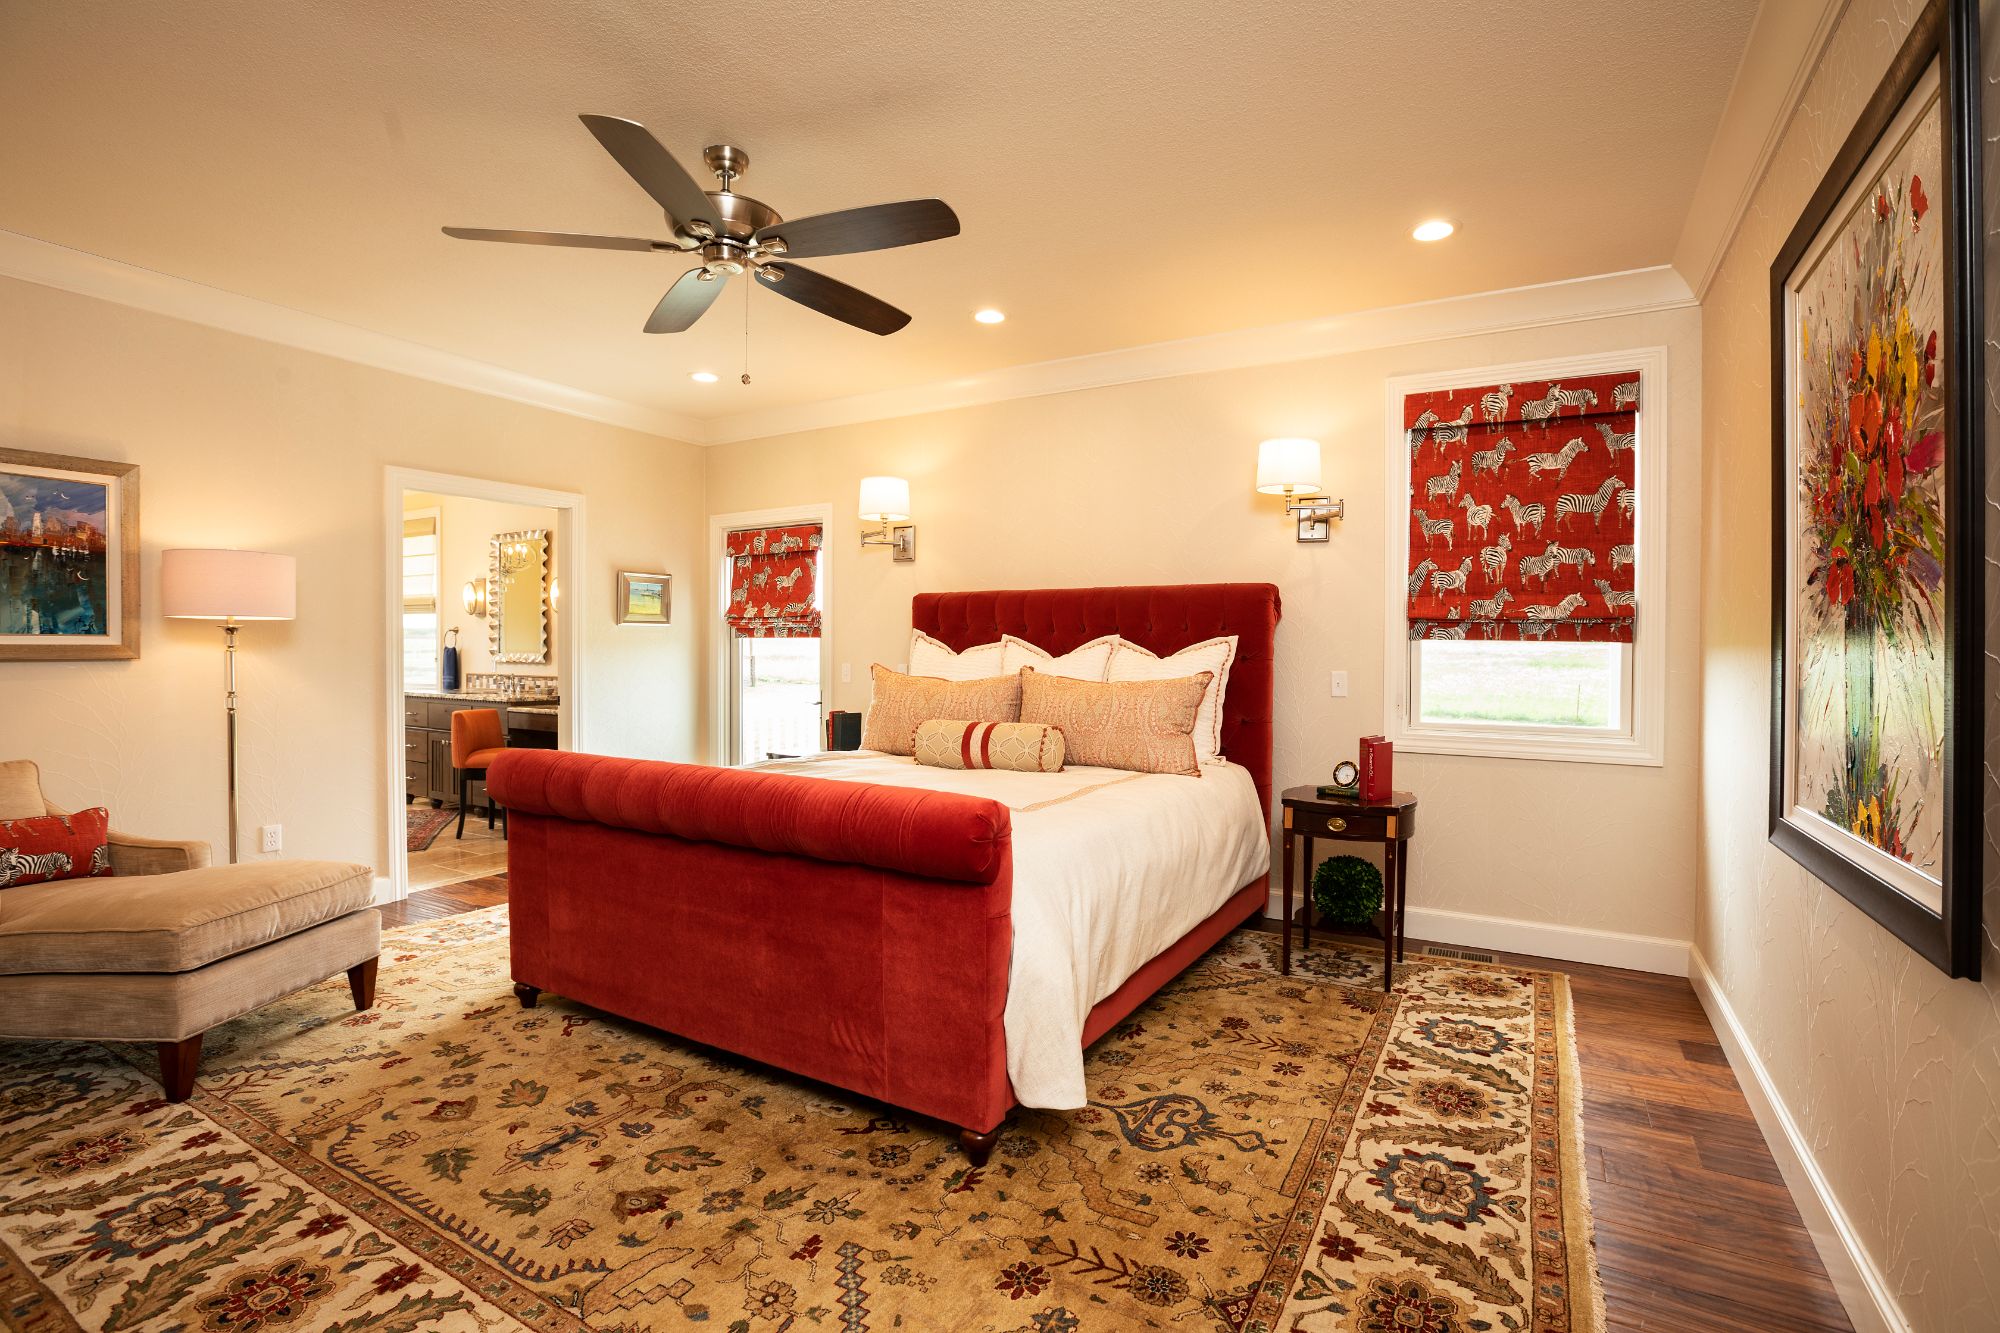 Try One Of These Bold & Trendy Color Schemes In The Bedroom